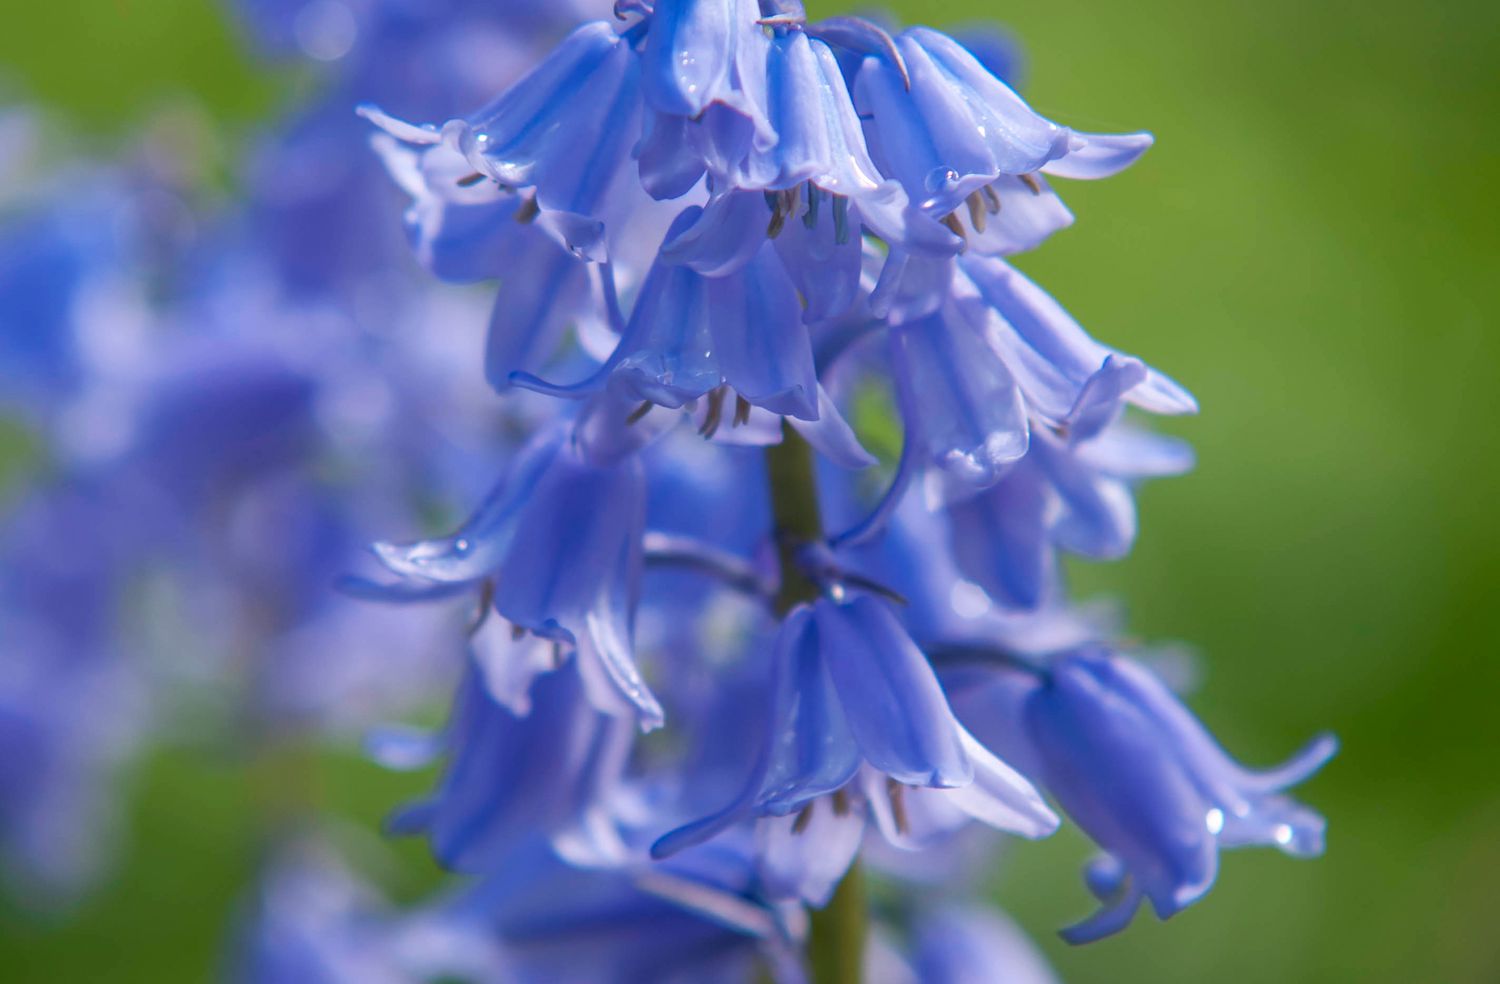 Spanish bluebell stem with blue flowers closeup